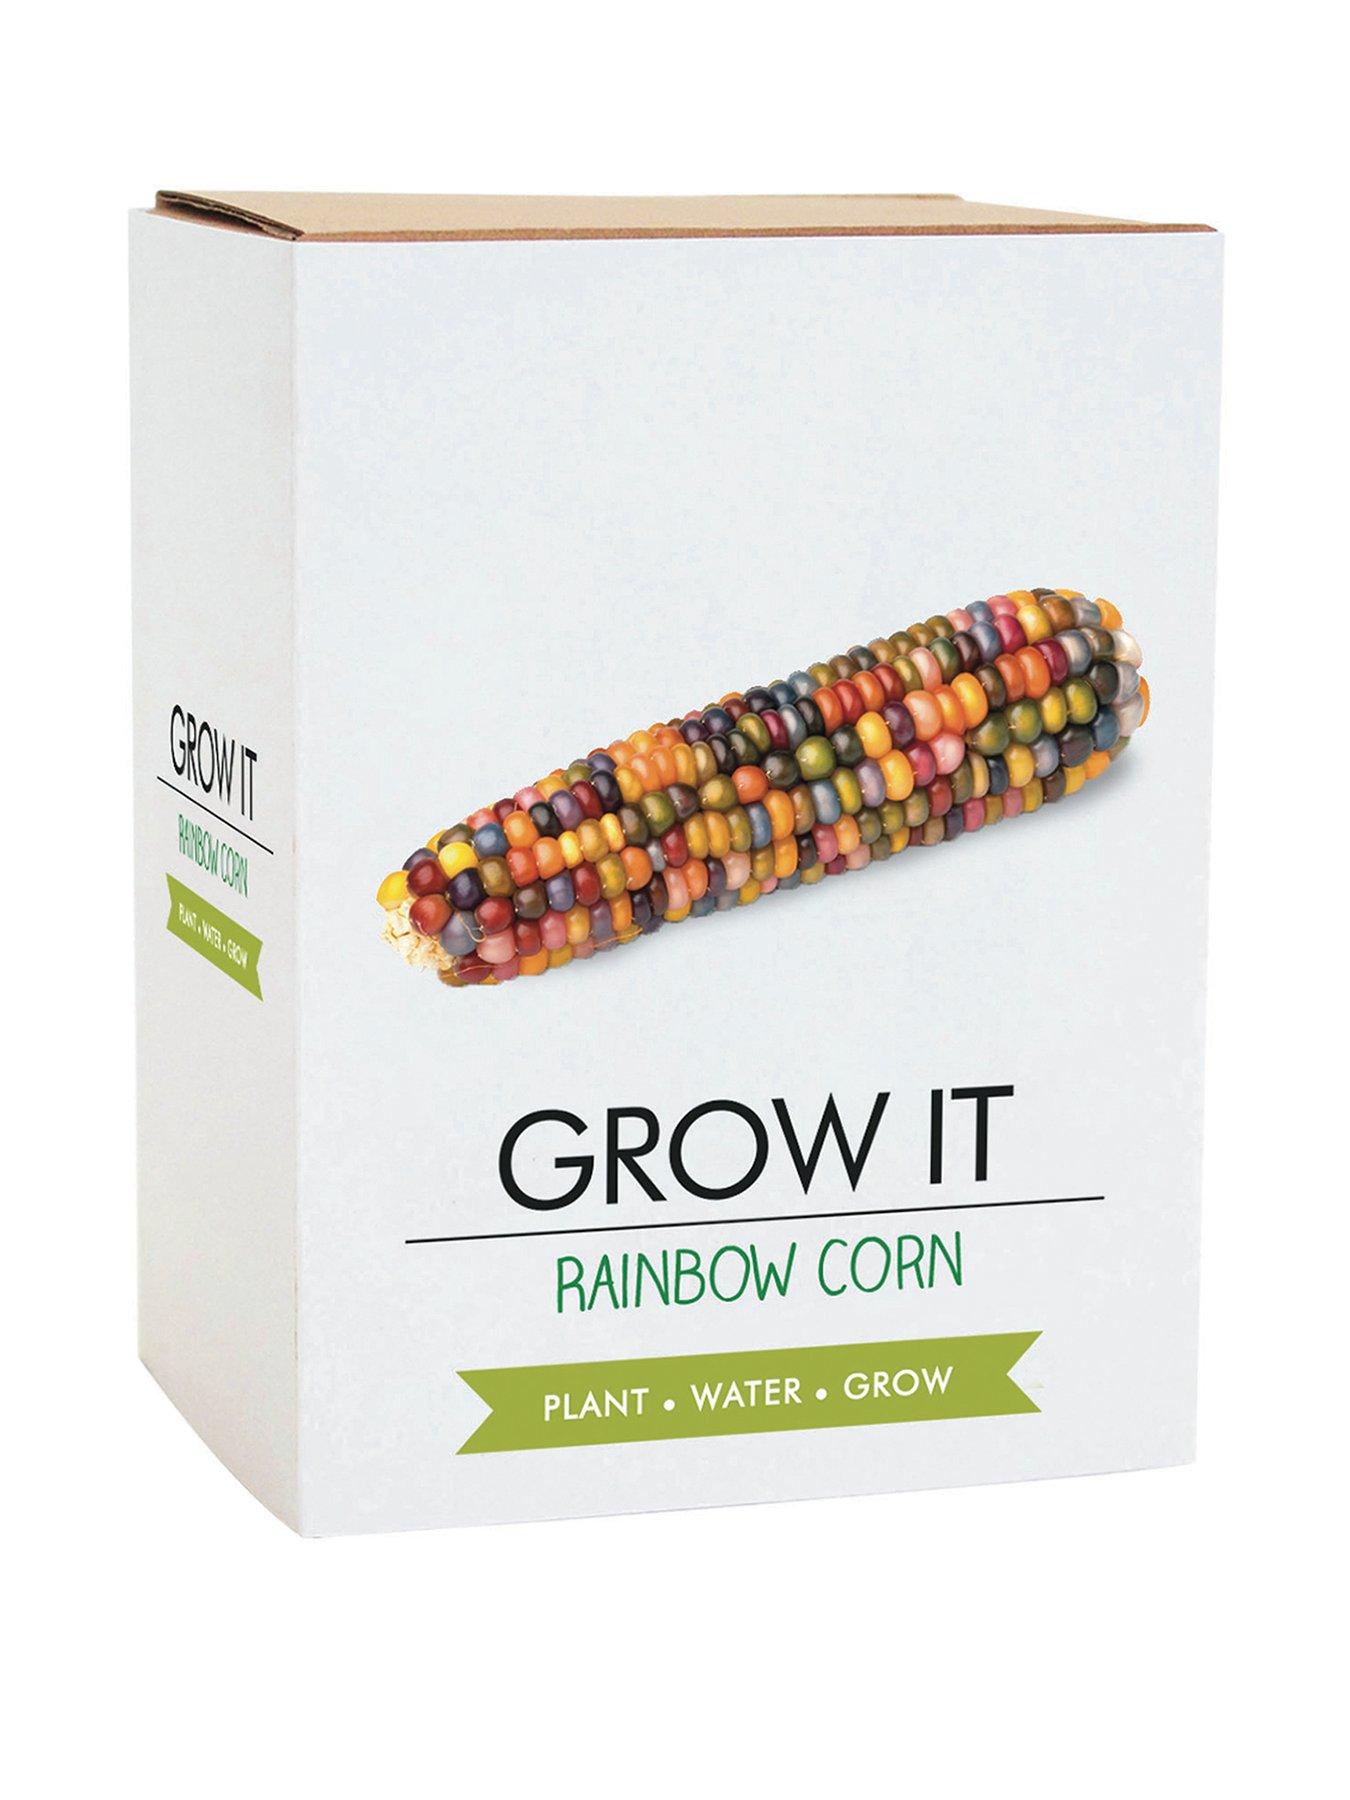 This Rainbow Veggie Growing Kit Is the Perfect Way To Welcome